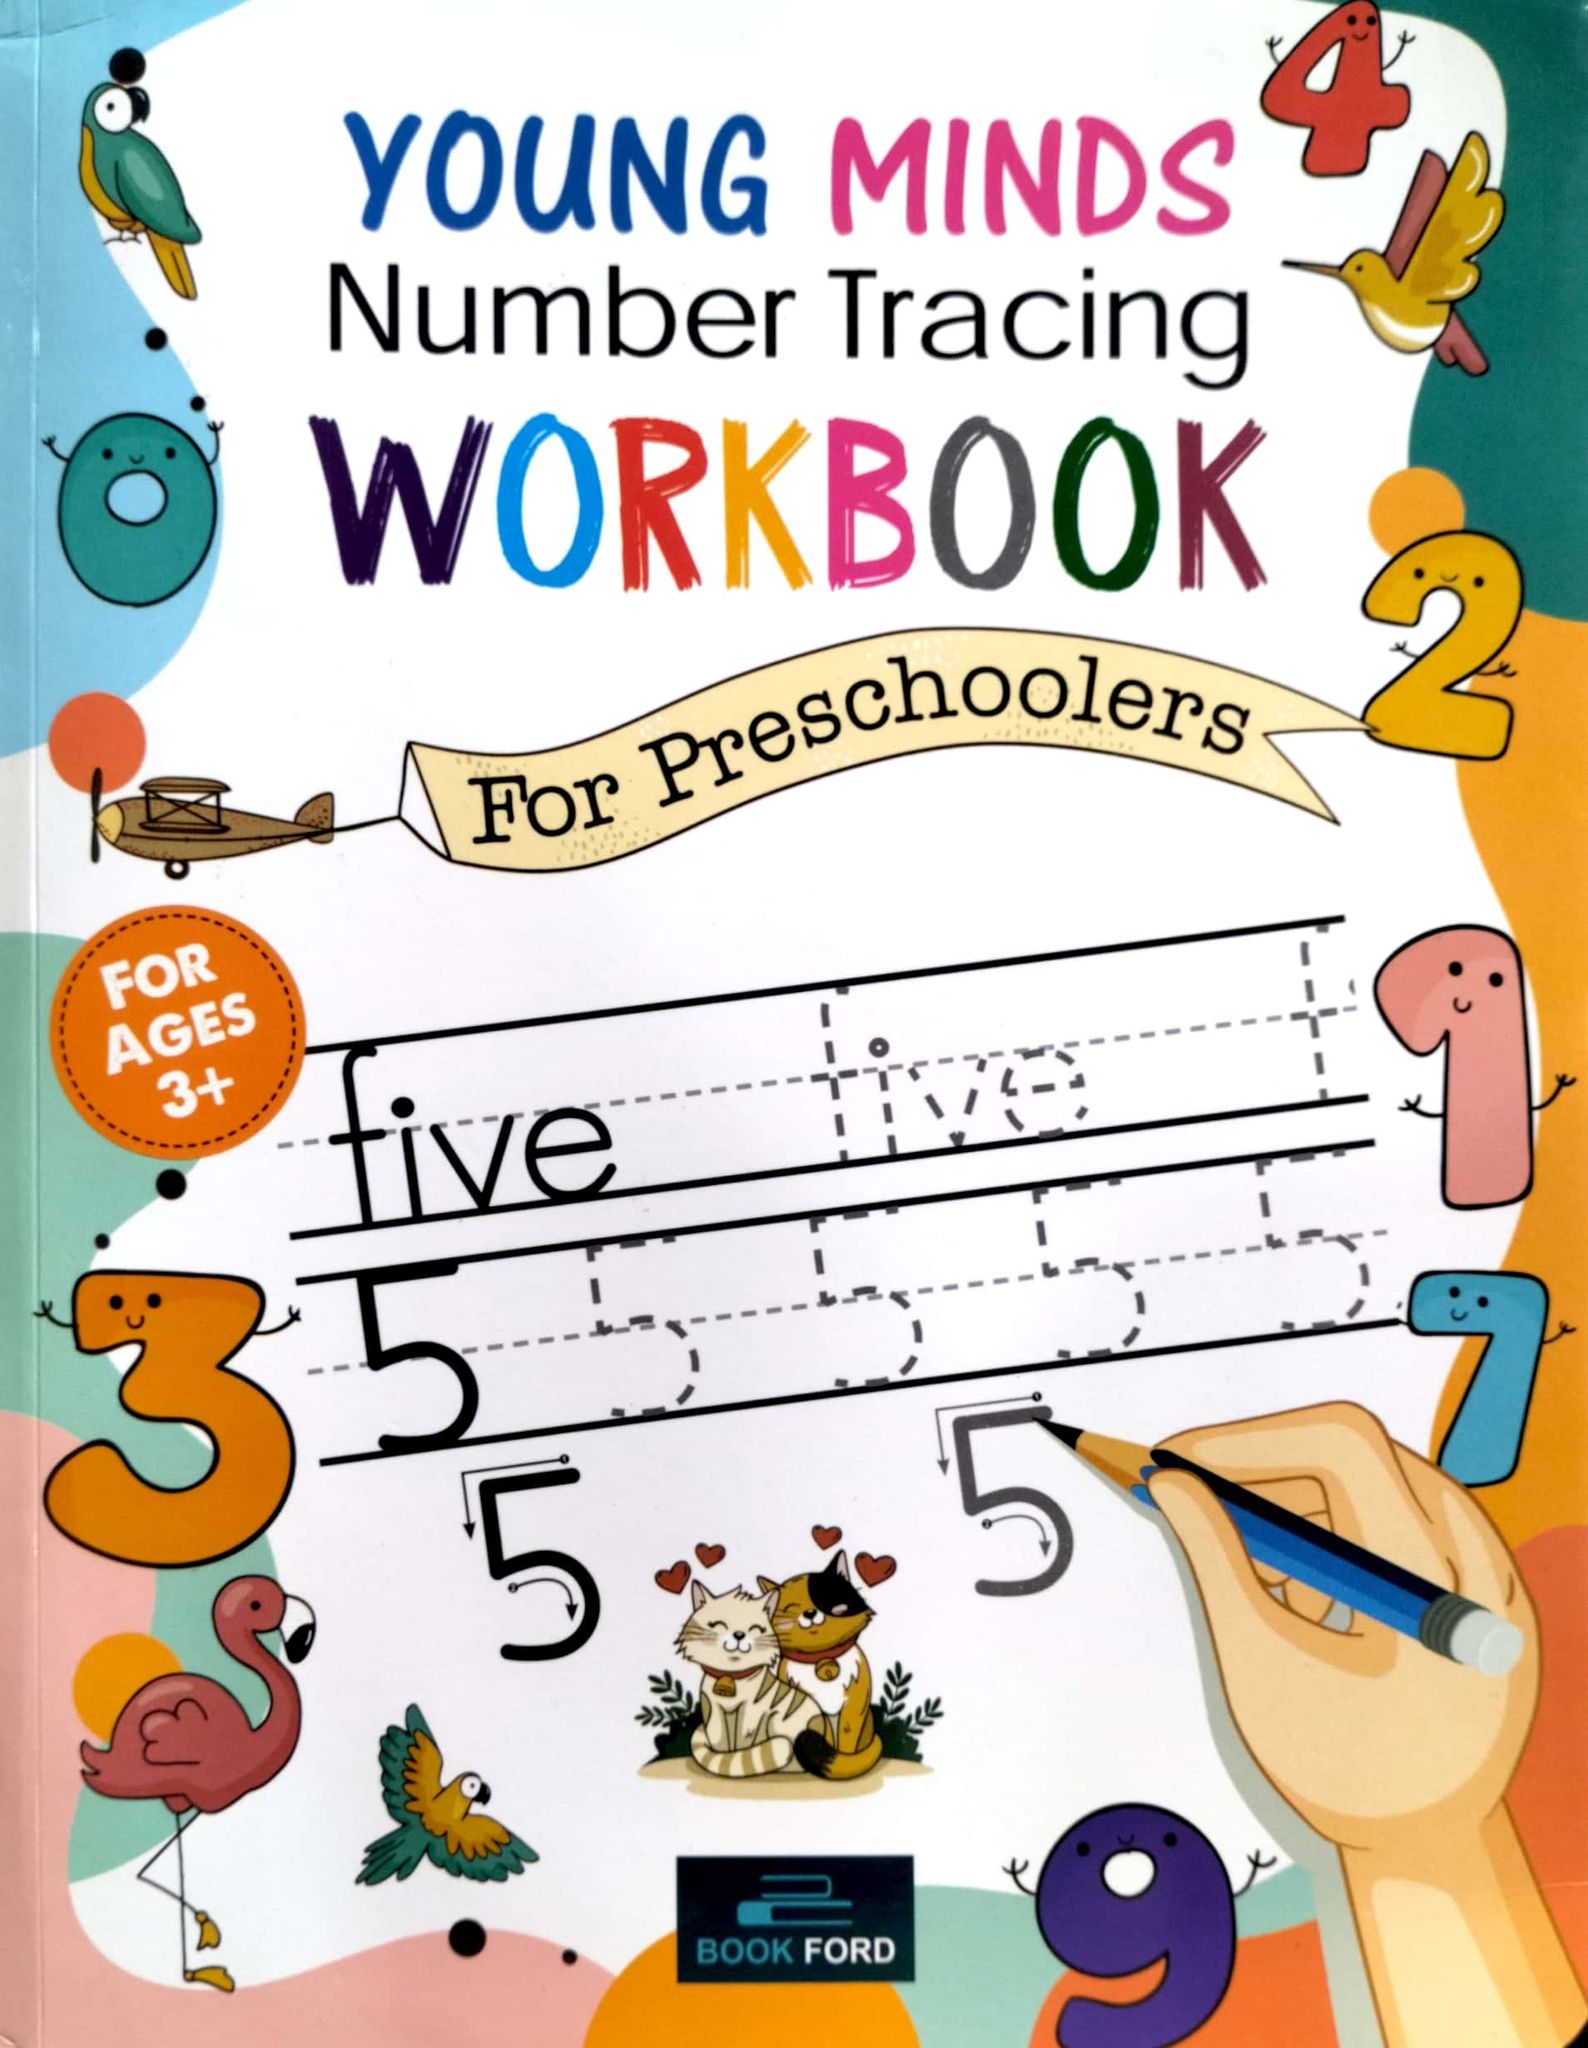 Young Minds Number Tracing Workbook For Preschoolers 5 (পেপারব্যাক)